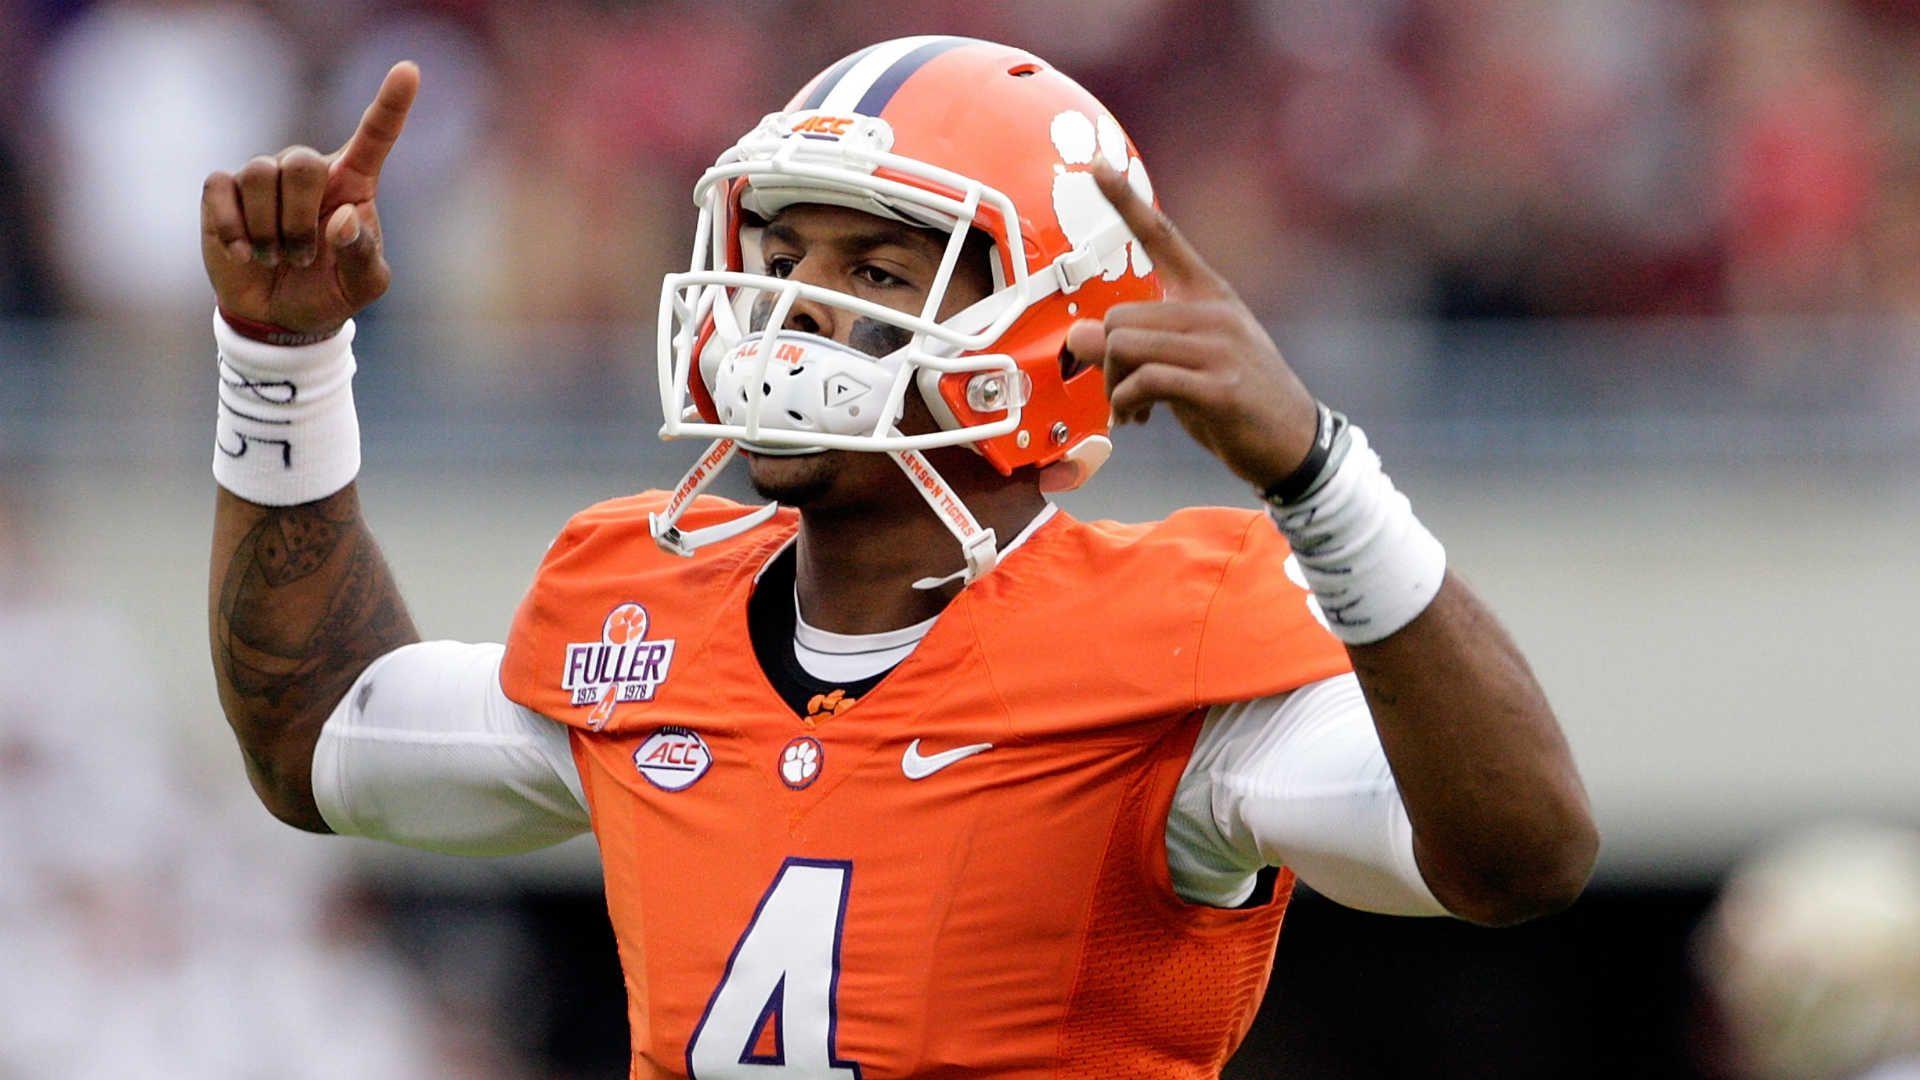 Forget Heisman, Deshaun Watson says he's 'the best player in the